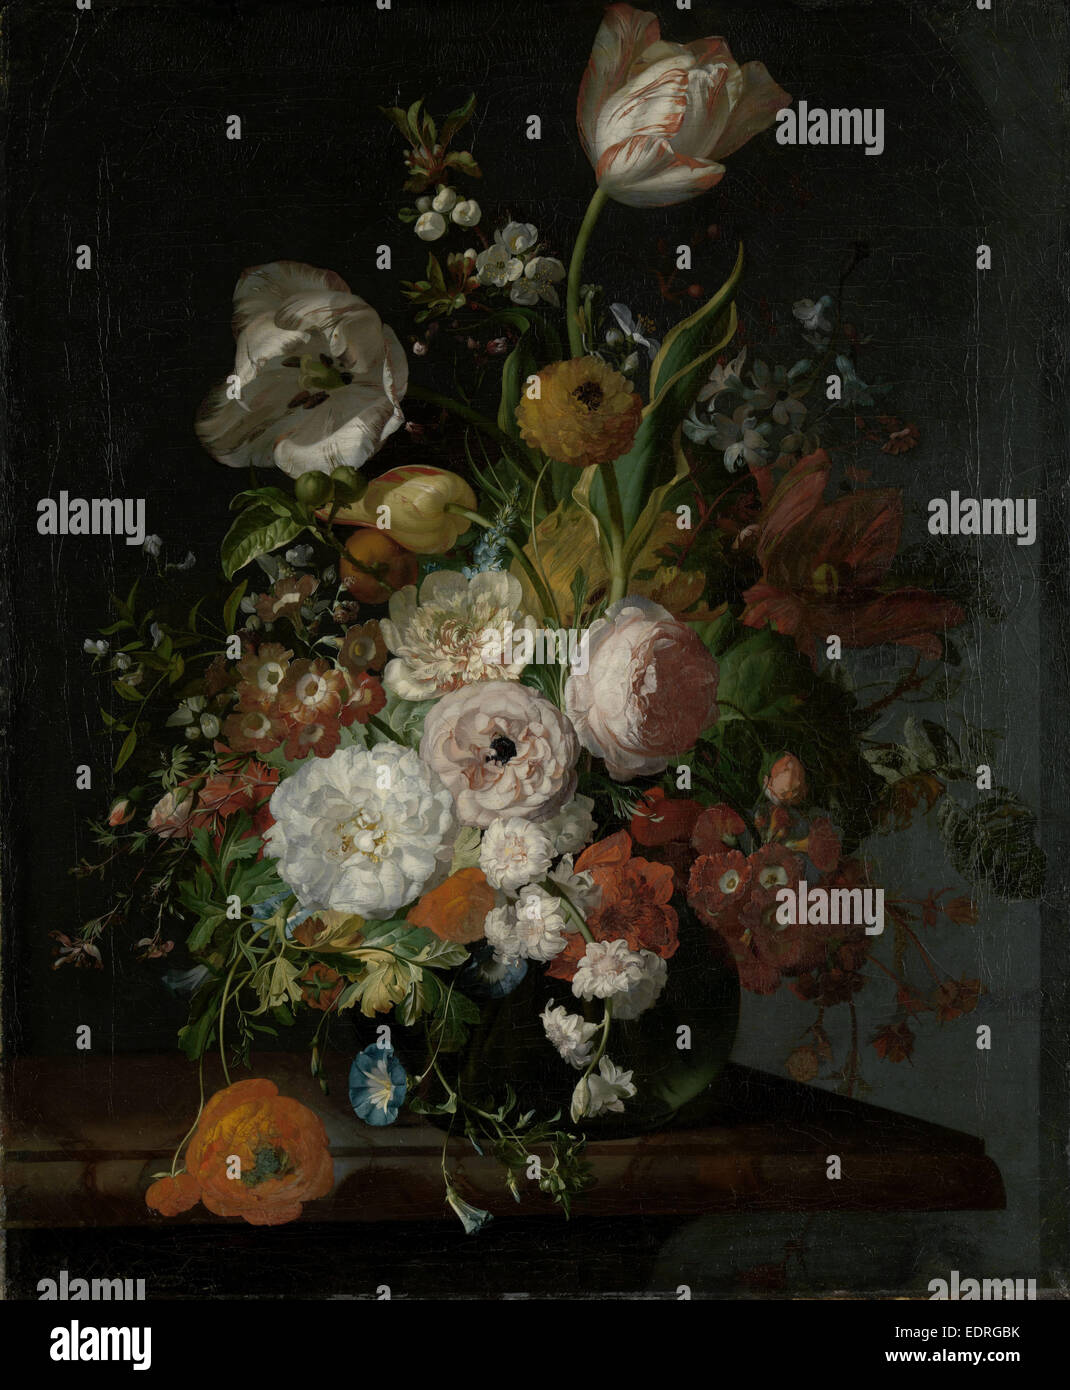 Still Life with Flowers in a Glass Vase, Rachel Ruysch, c. 1690 - c. 1720 Stock Photo